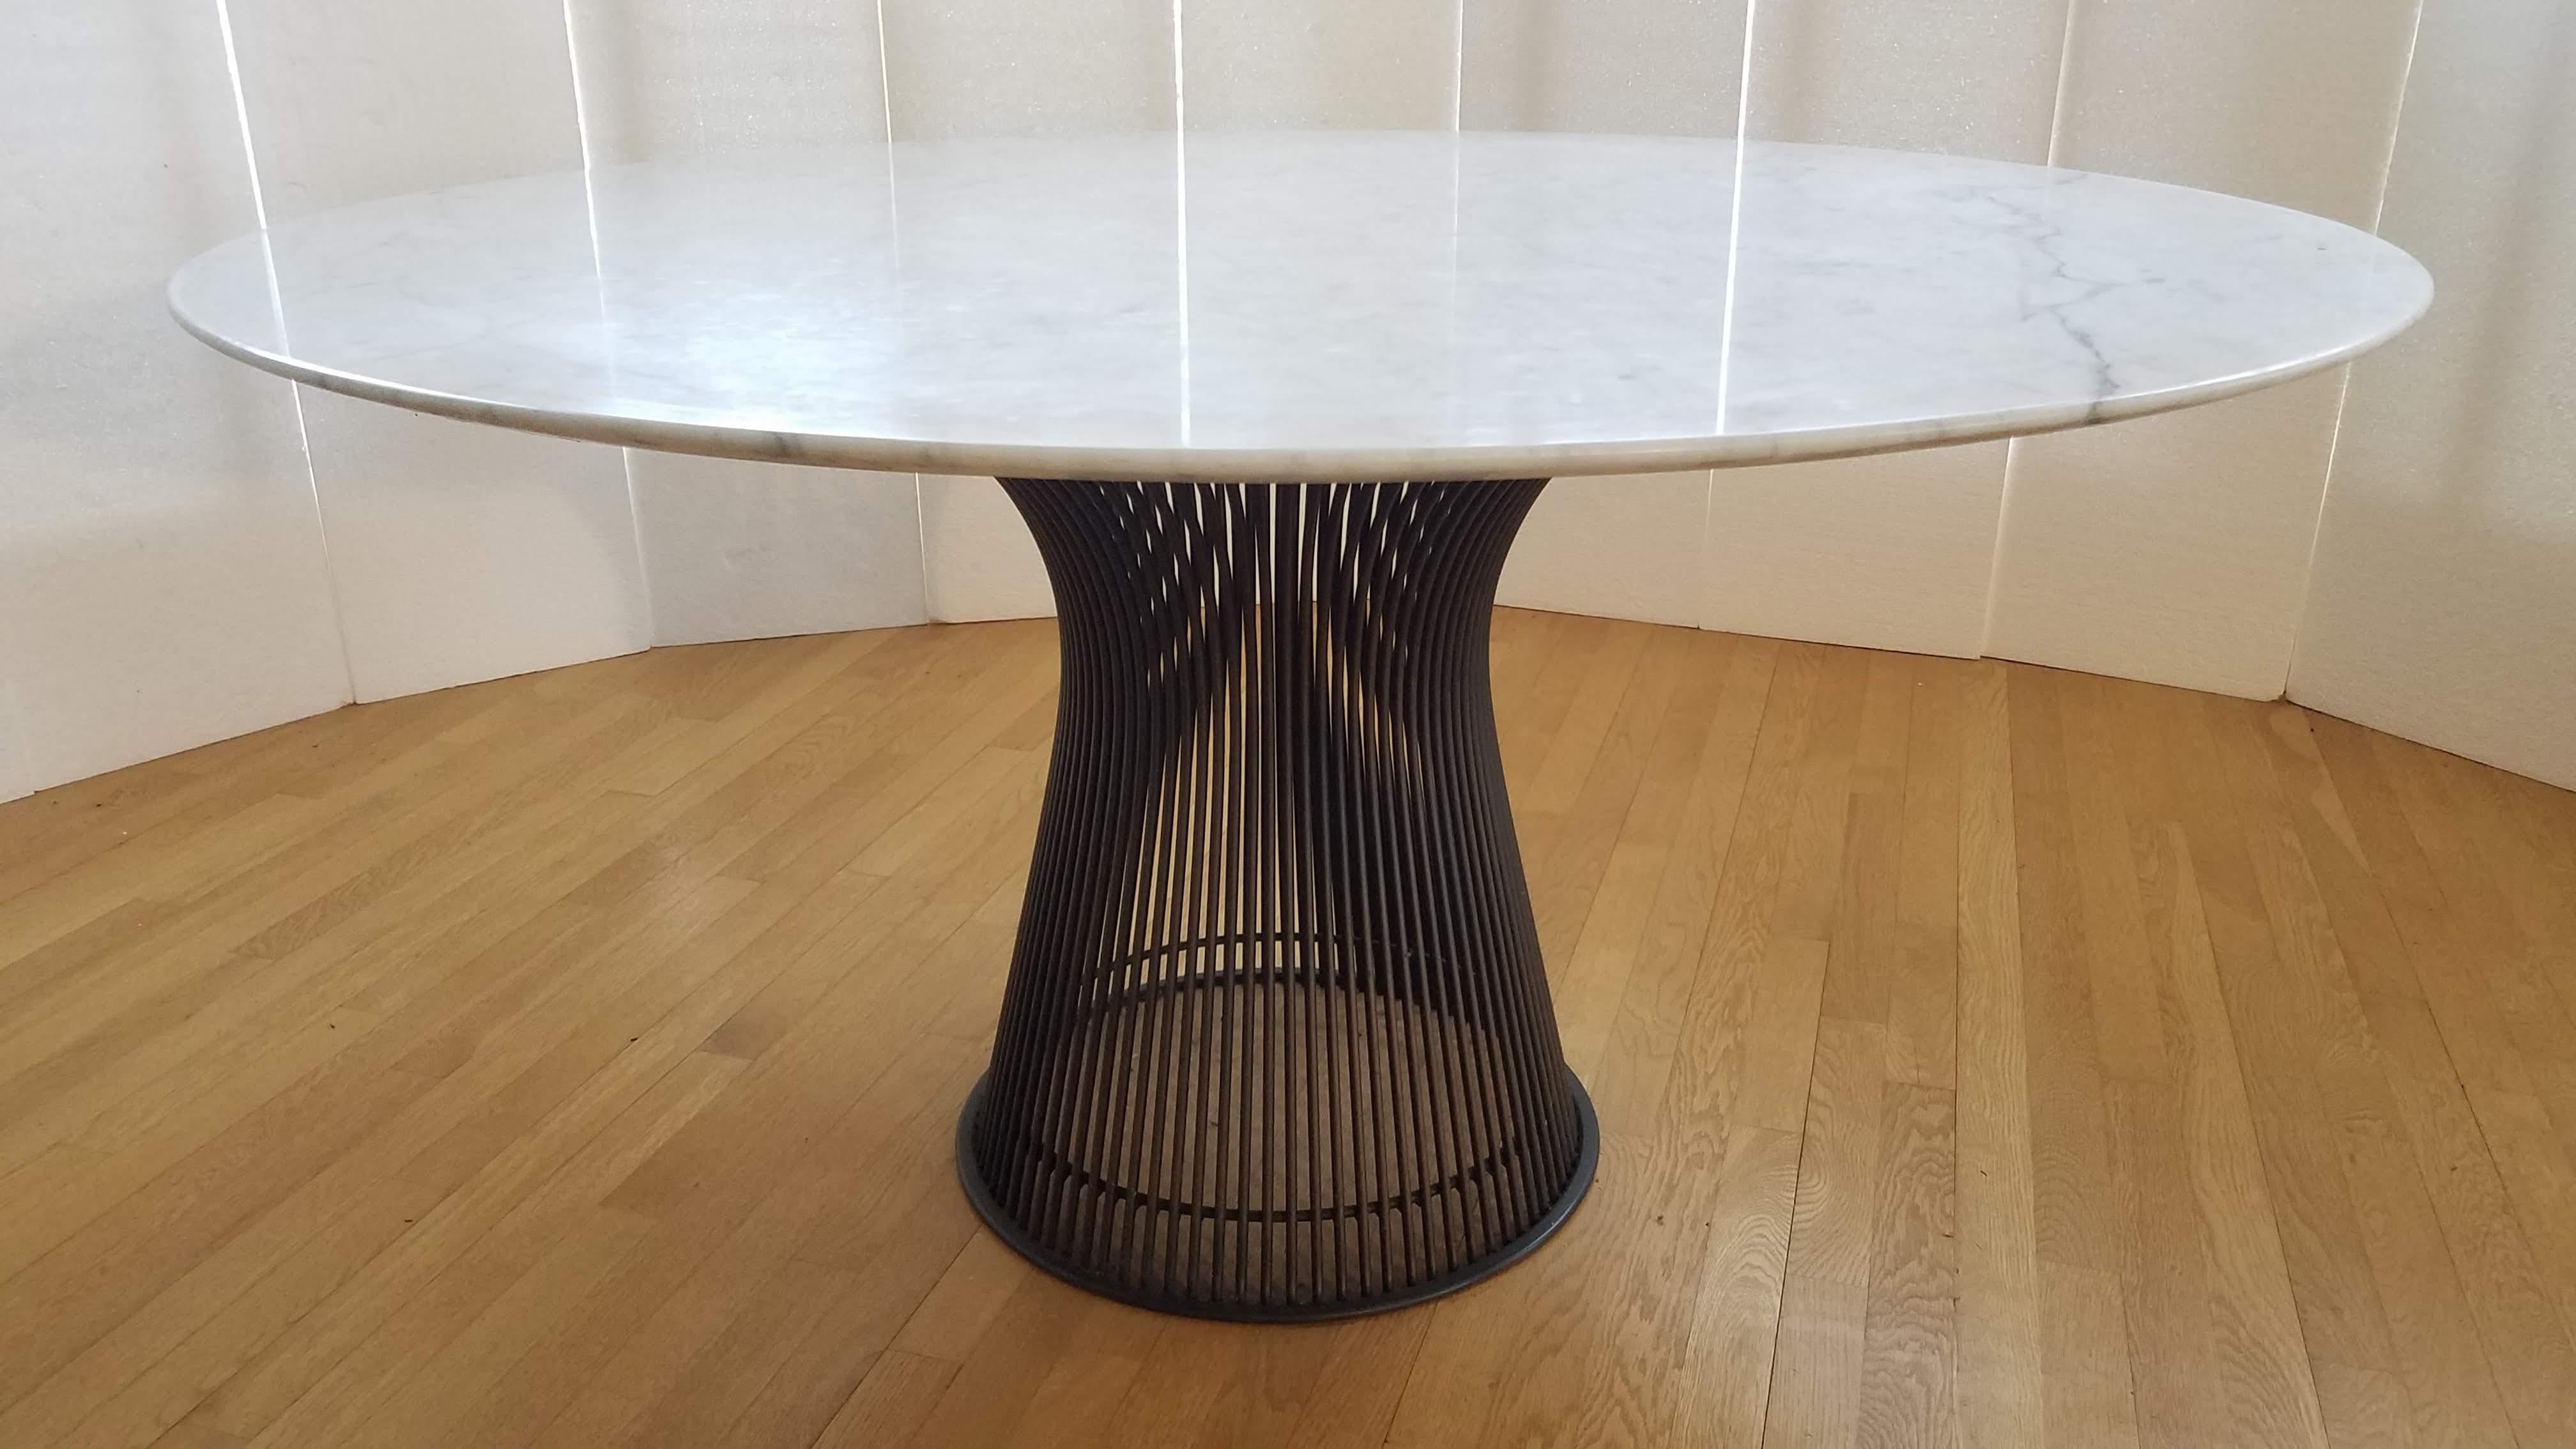 Warren Platner dining table with a bronze pigmented welded rod base with its original Arabescato Marble top by Knoll late 1960s.
Warren Platner worked for I.M. Pei and Eero Saarinen prior to designing the Platner collection for Knoll in 1962.
He